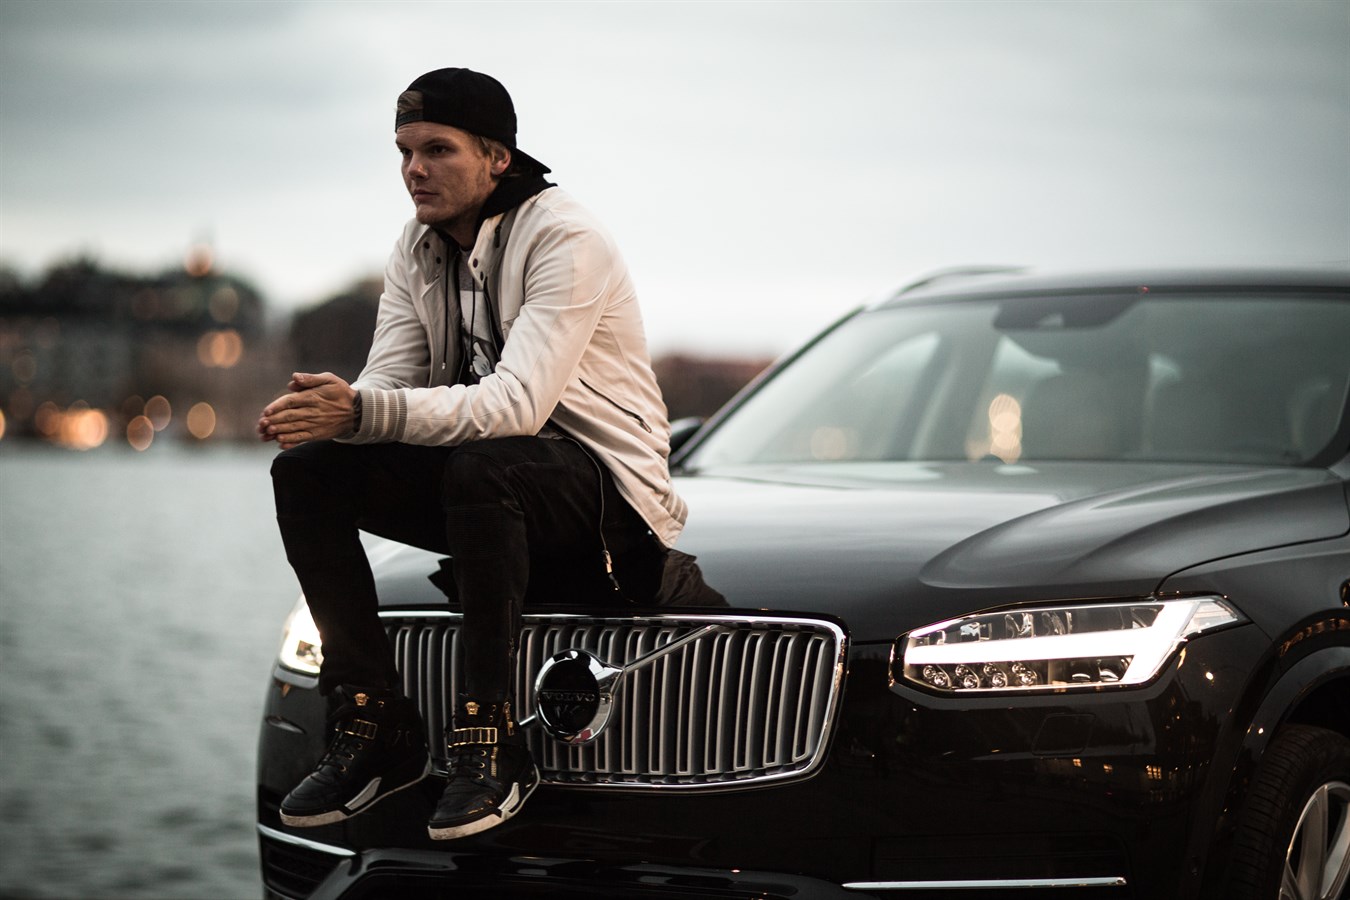 Volvo Car and artist & producer Avicii Feeling Good about the future